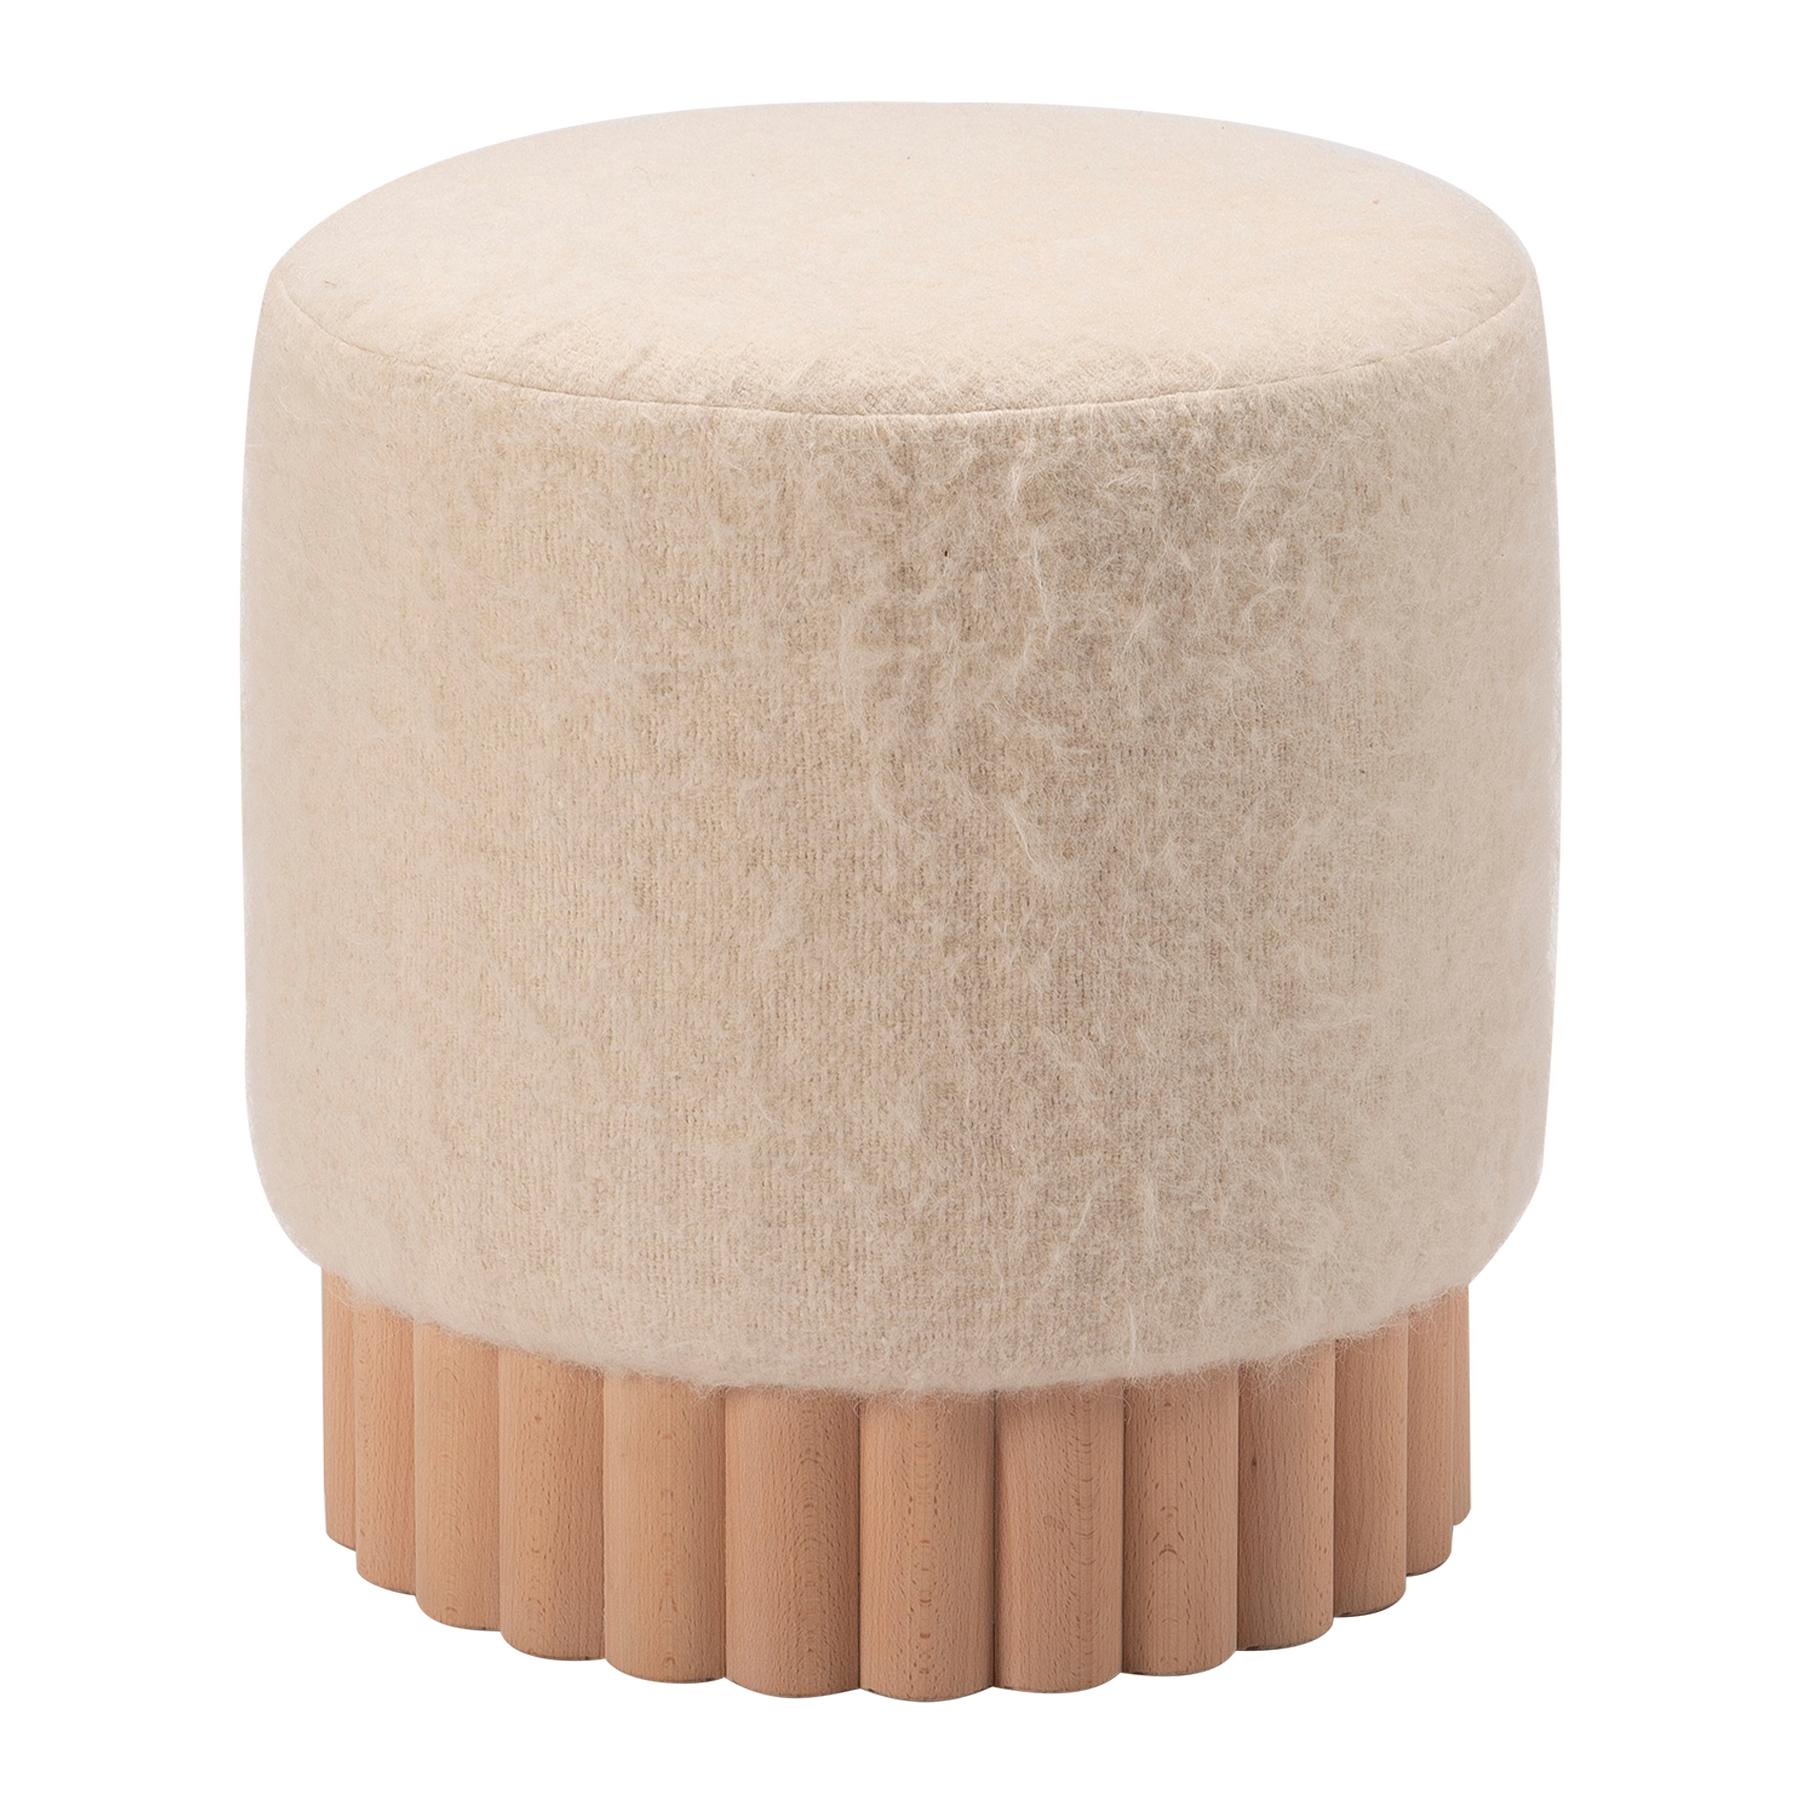 Loto Pouf, Beech, Tzalam or Blackened Oak Wood and Leather or Fabric